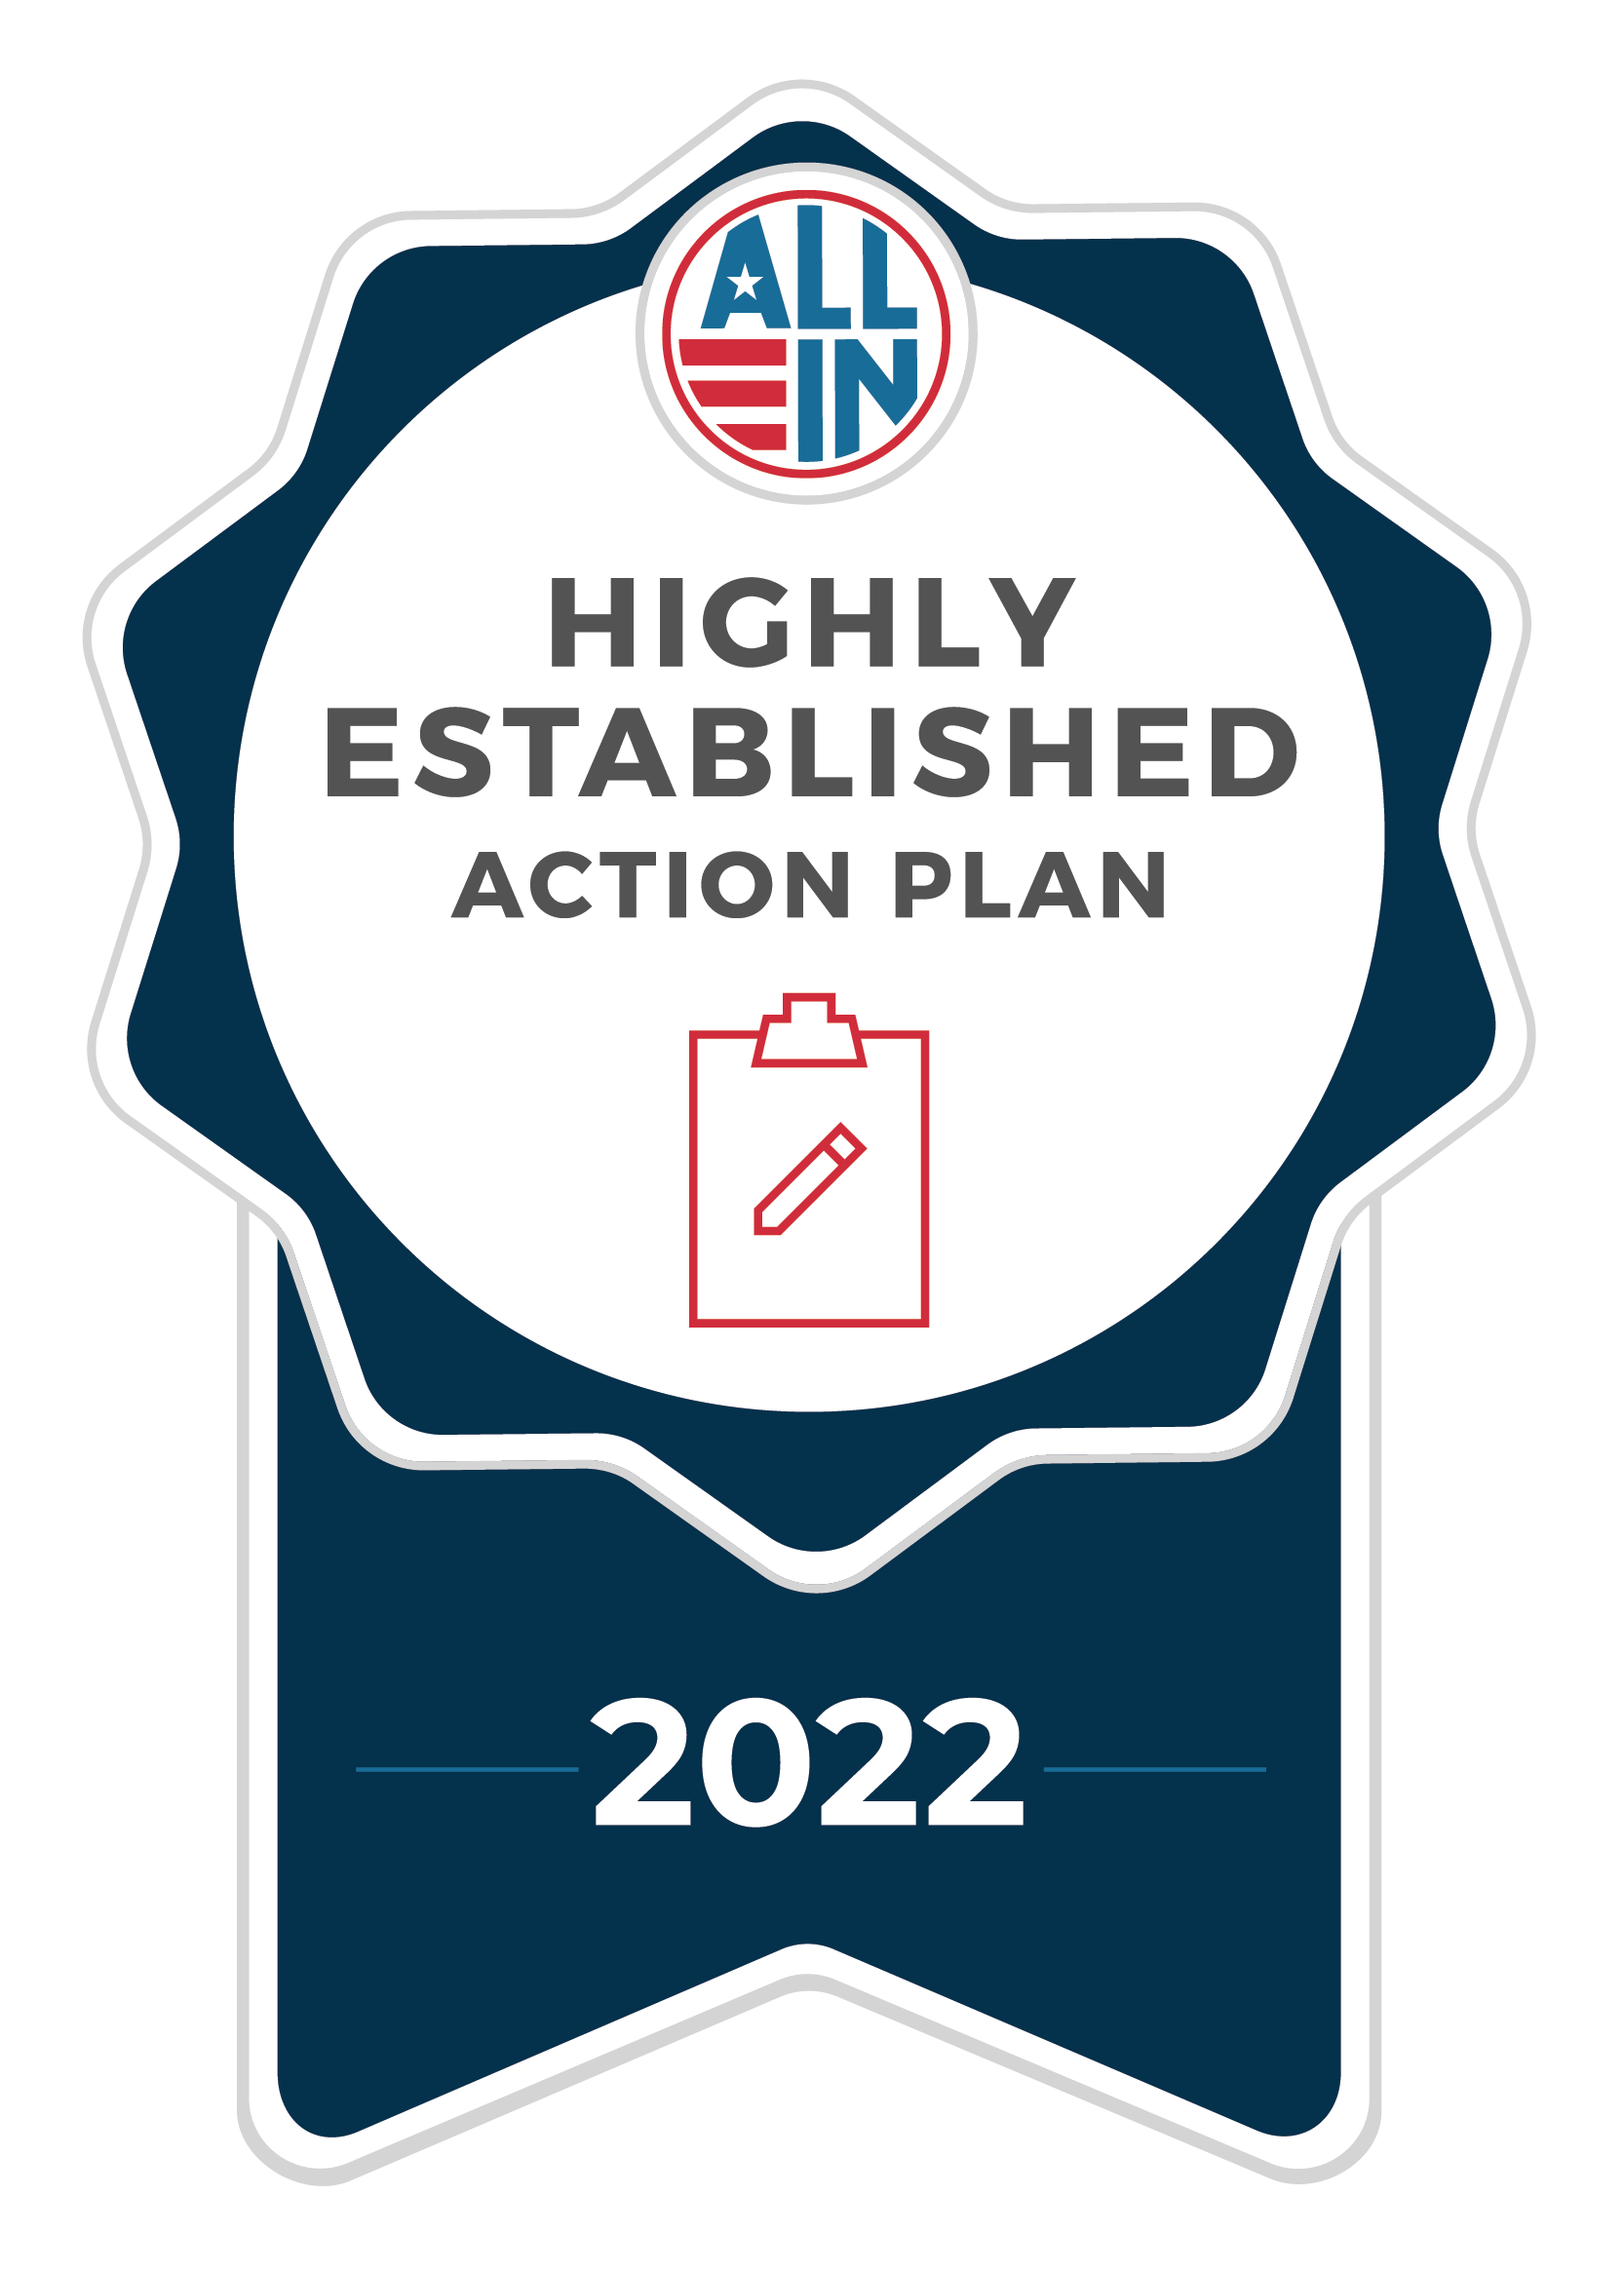 2022 ALL IN Highly Established Action Plan Seal